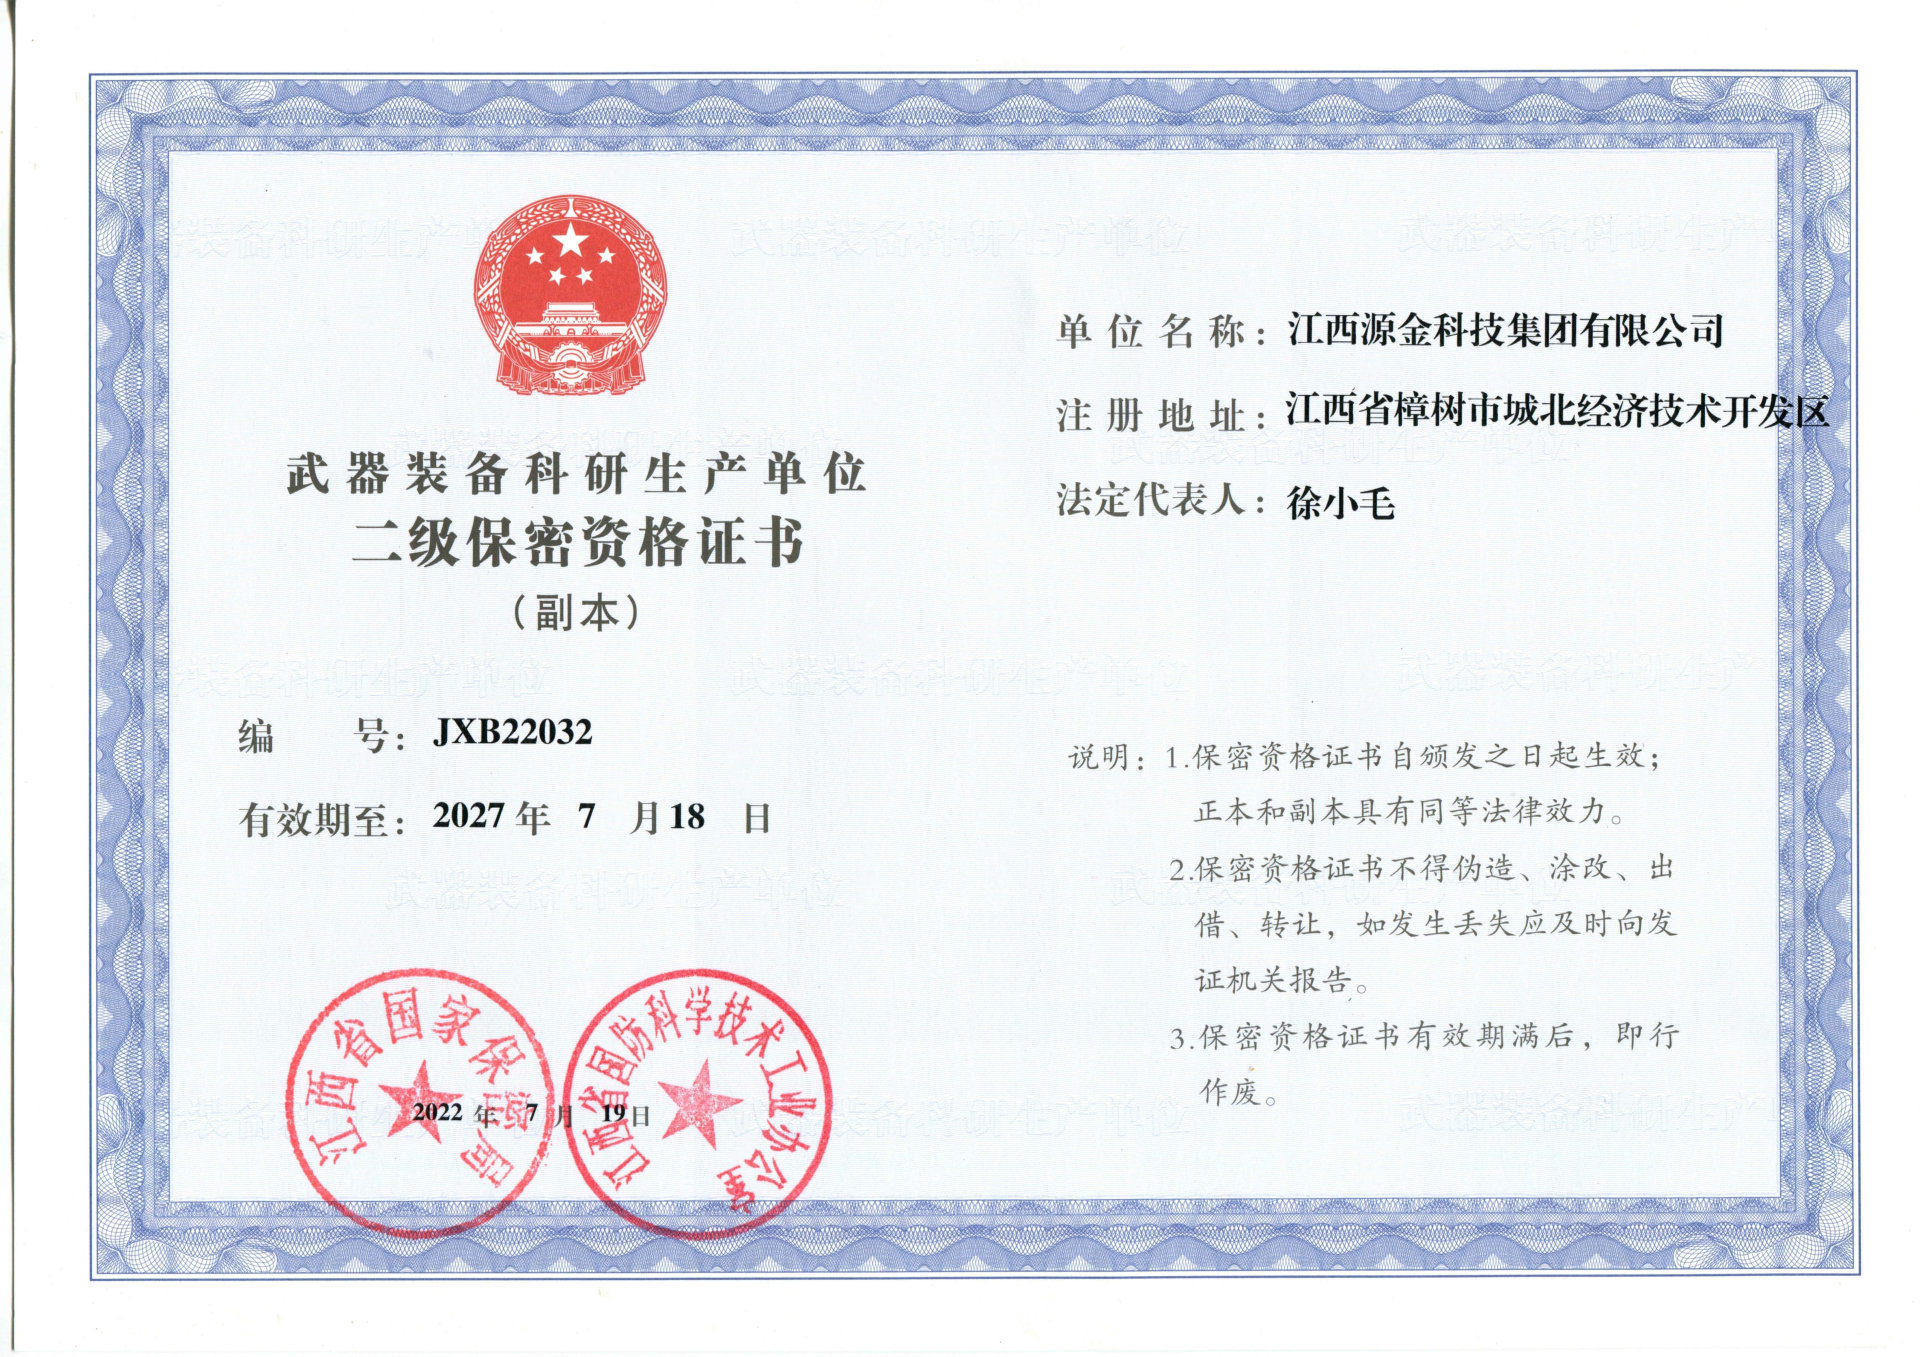 Class II confidentiality certificate of weapons and equipment